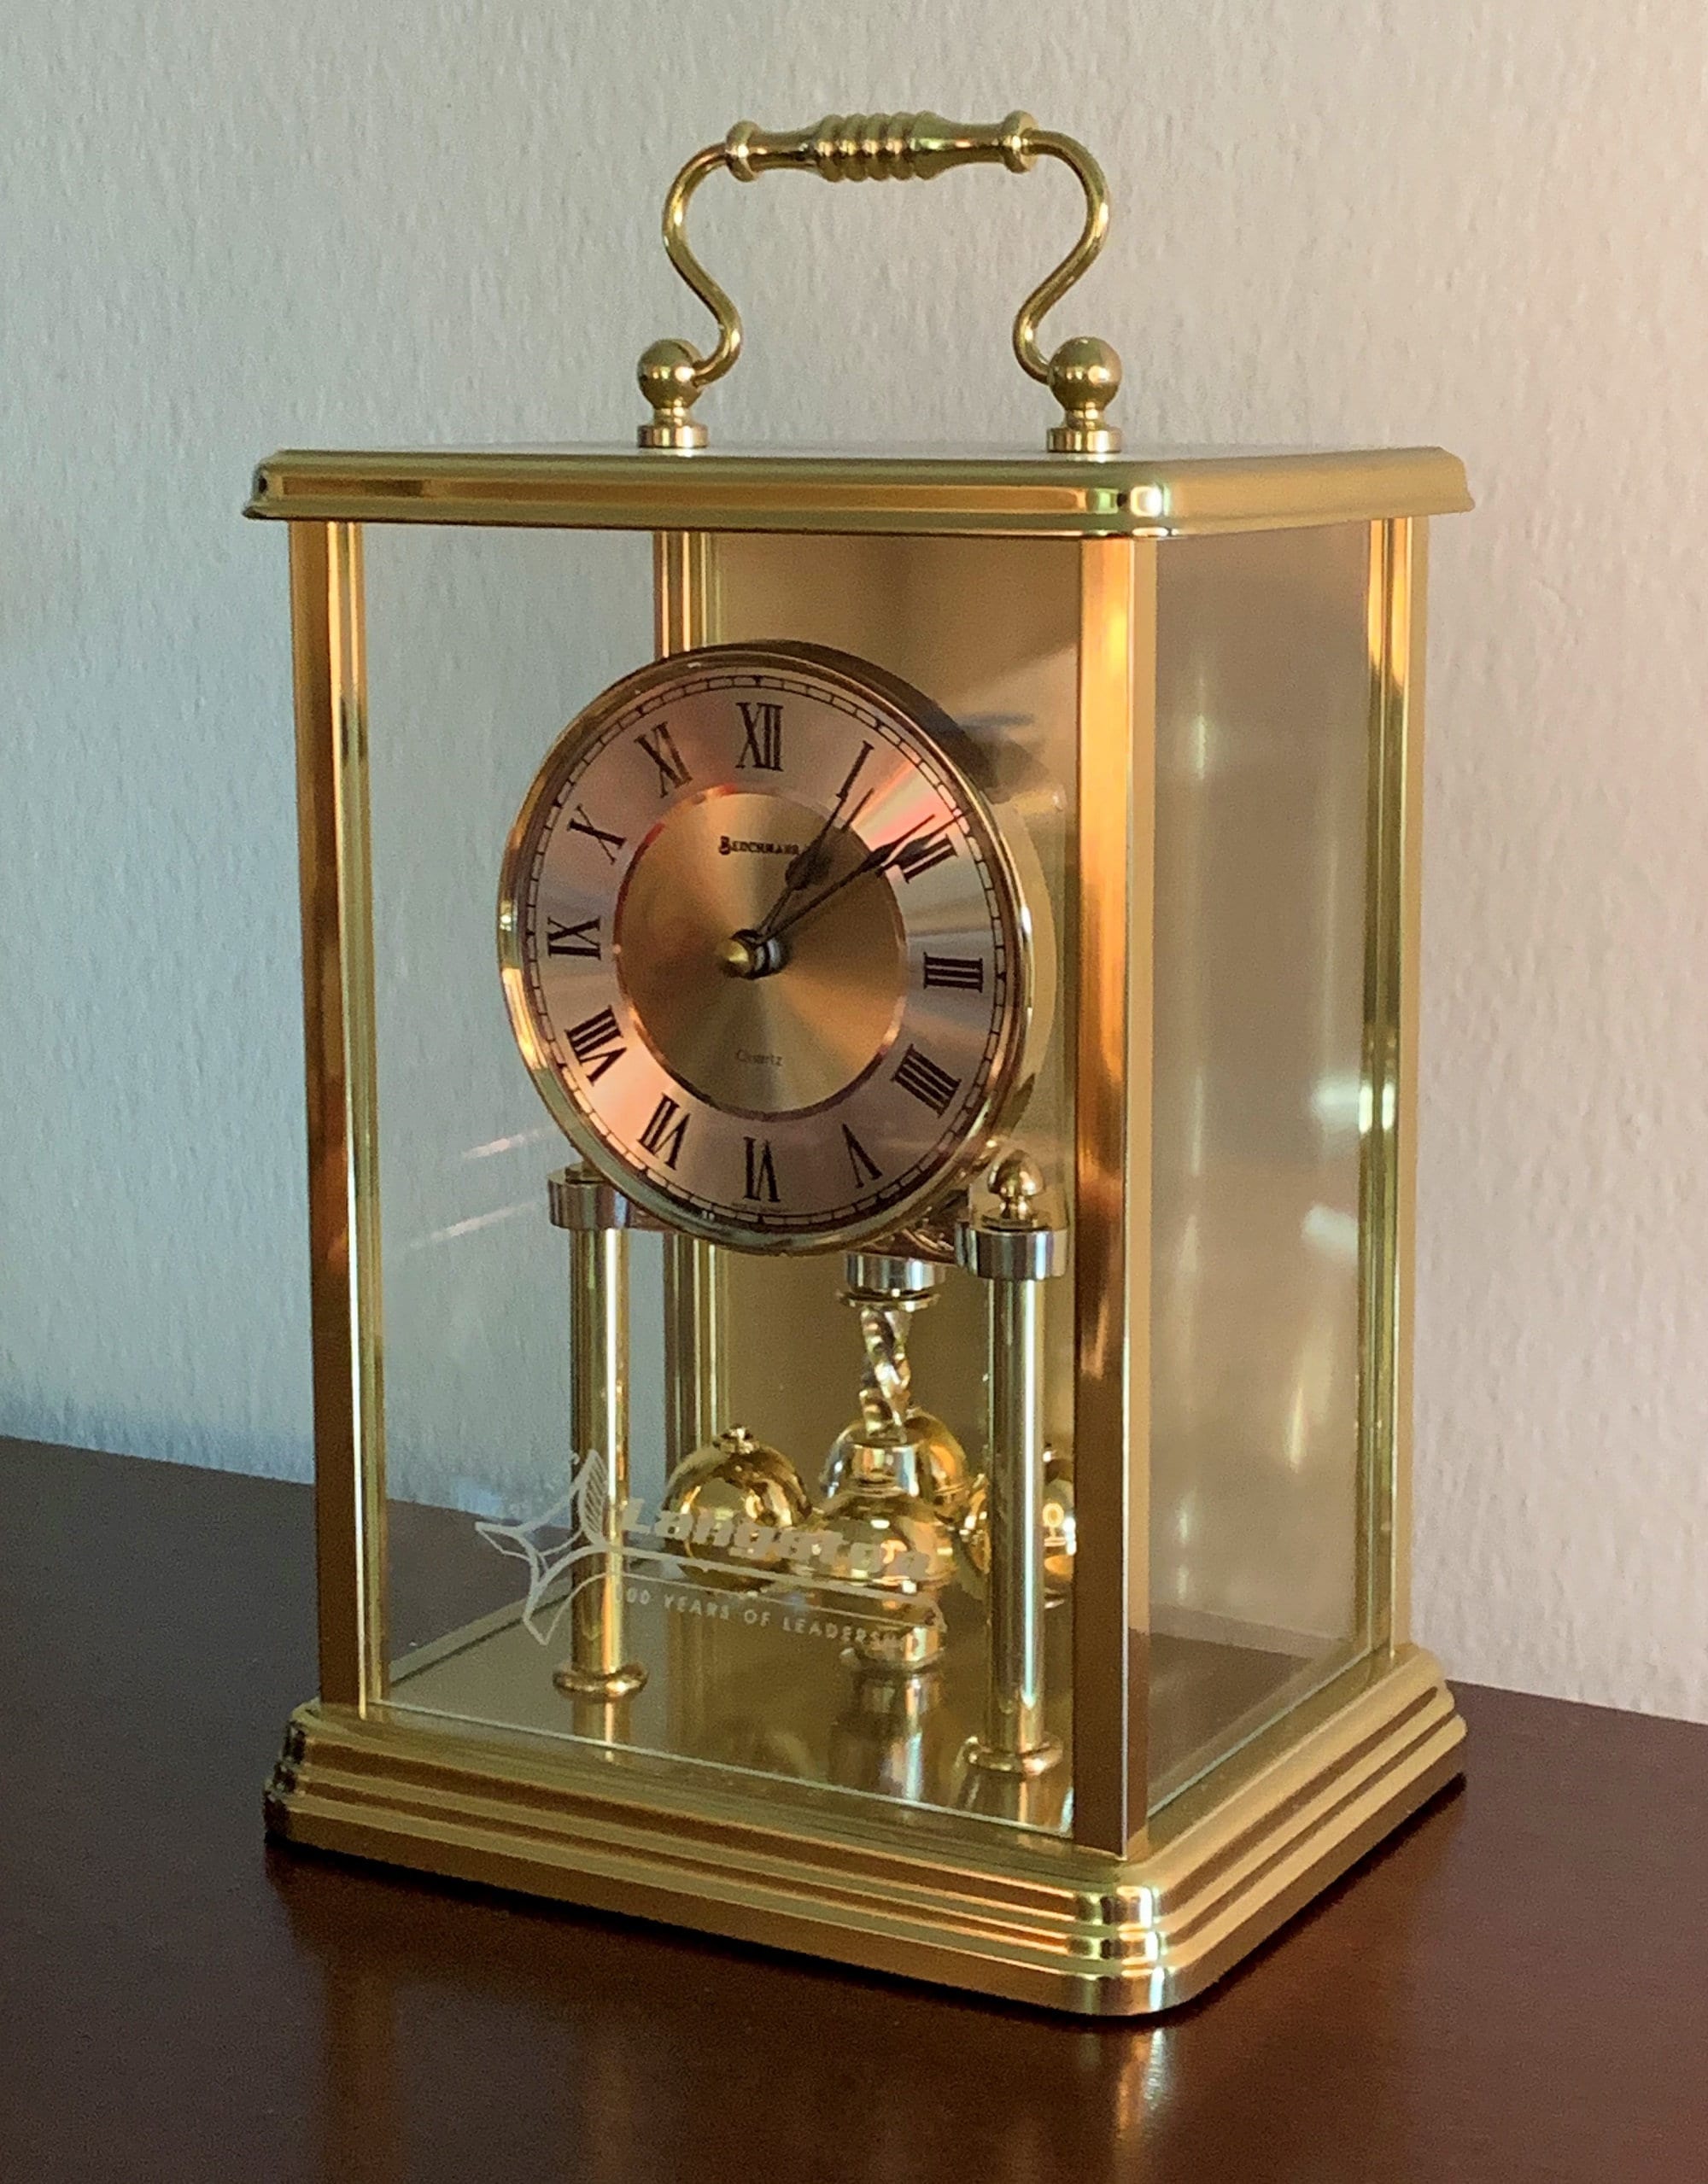 Requires 1 AA Battery Tested Cond Solid Brushed & Polished Brass made in Germany 197080s in Exc Working Benchmark Quartz Mantel Clock